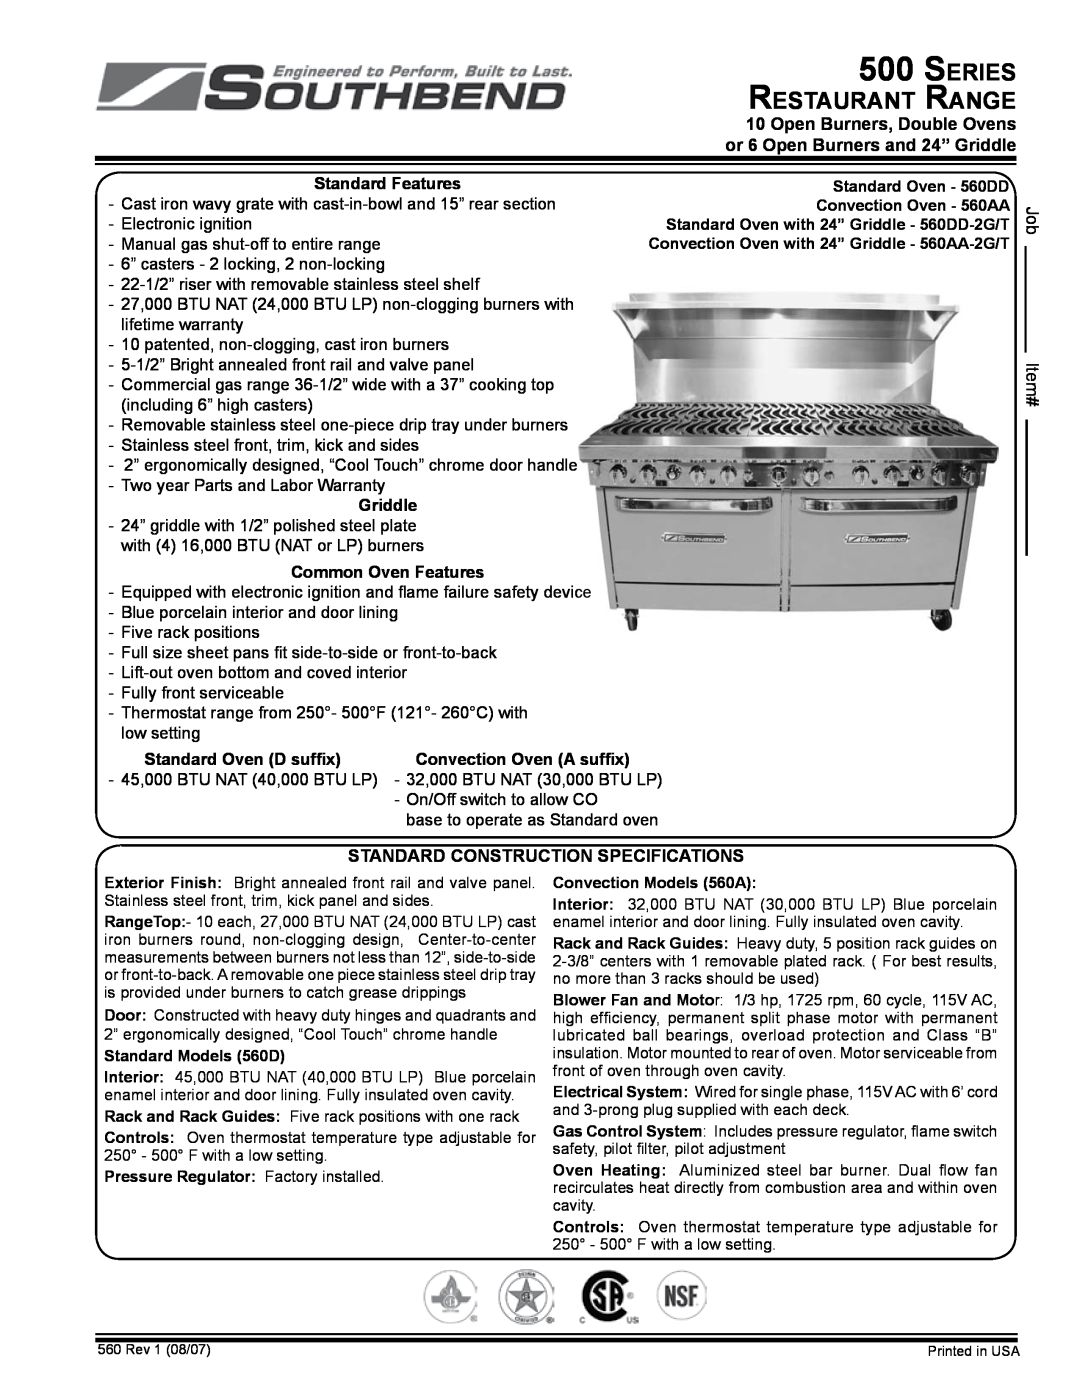 Southbend 500 Series specifications Open Burners, Double Ovens, or 6 Open Burners and 24” Griddle, Standard Features 